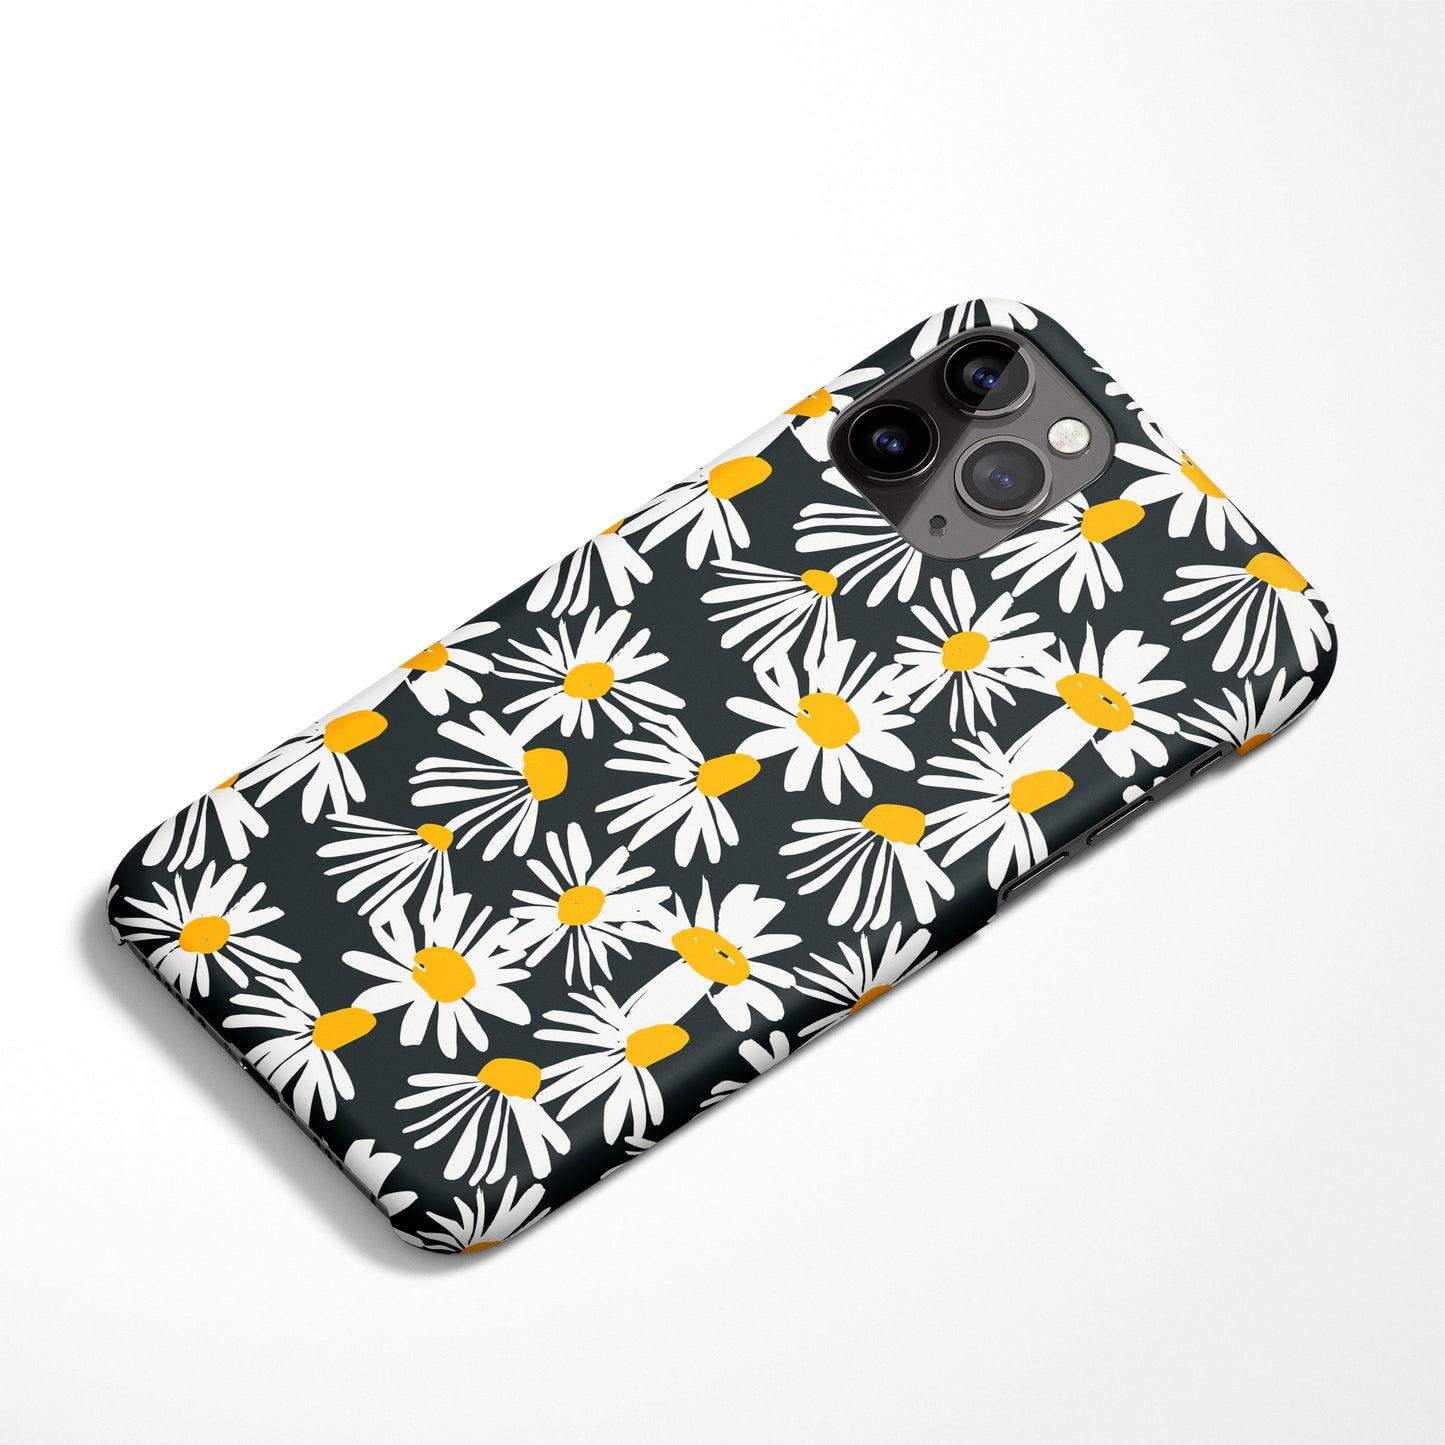 iPhone 12 Cases with daisies